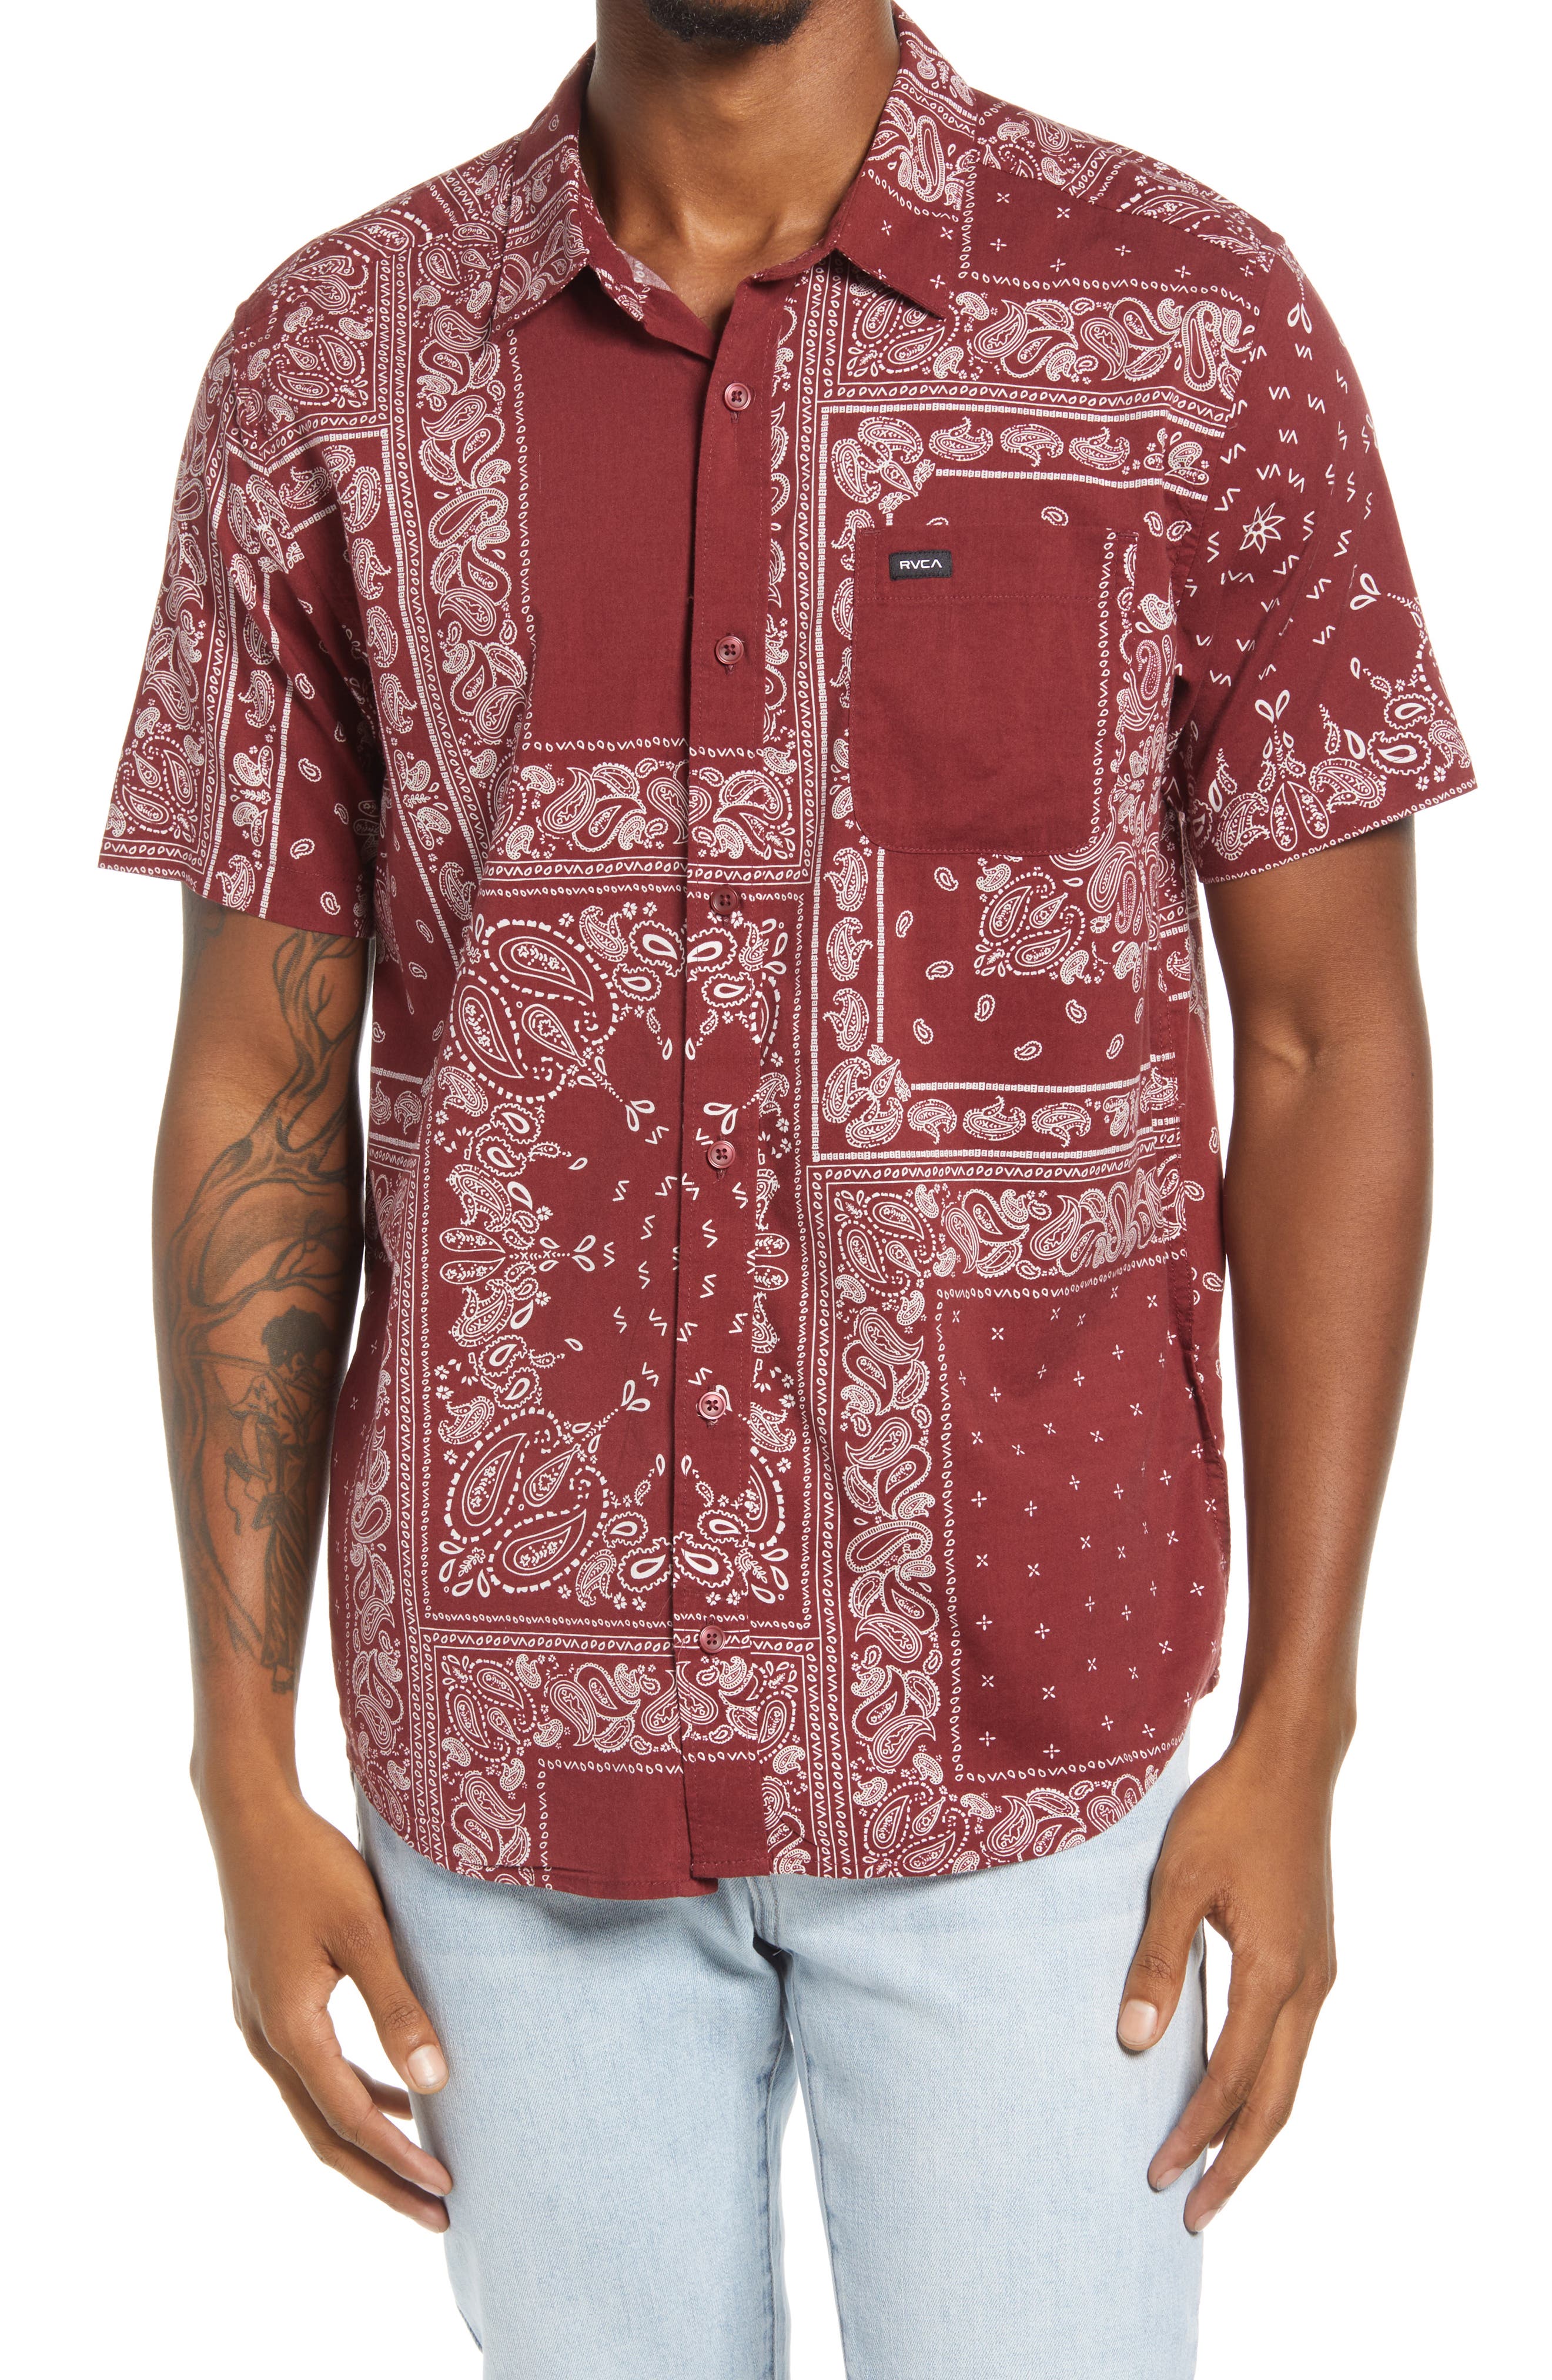 Men's Red Button Up Shirts | Nordstrom